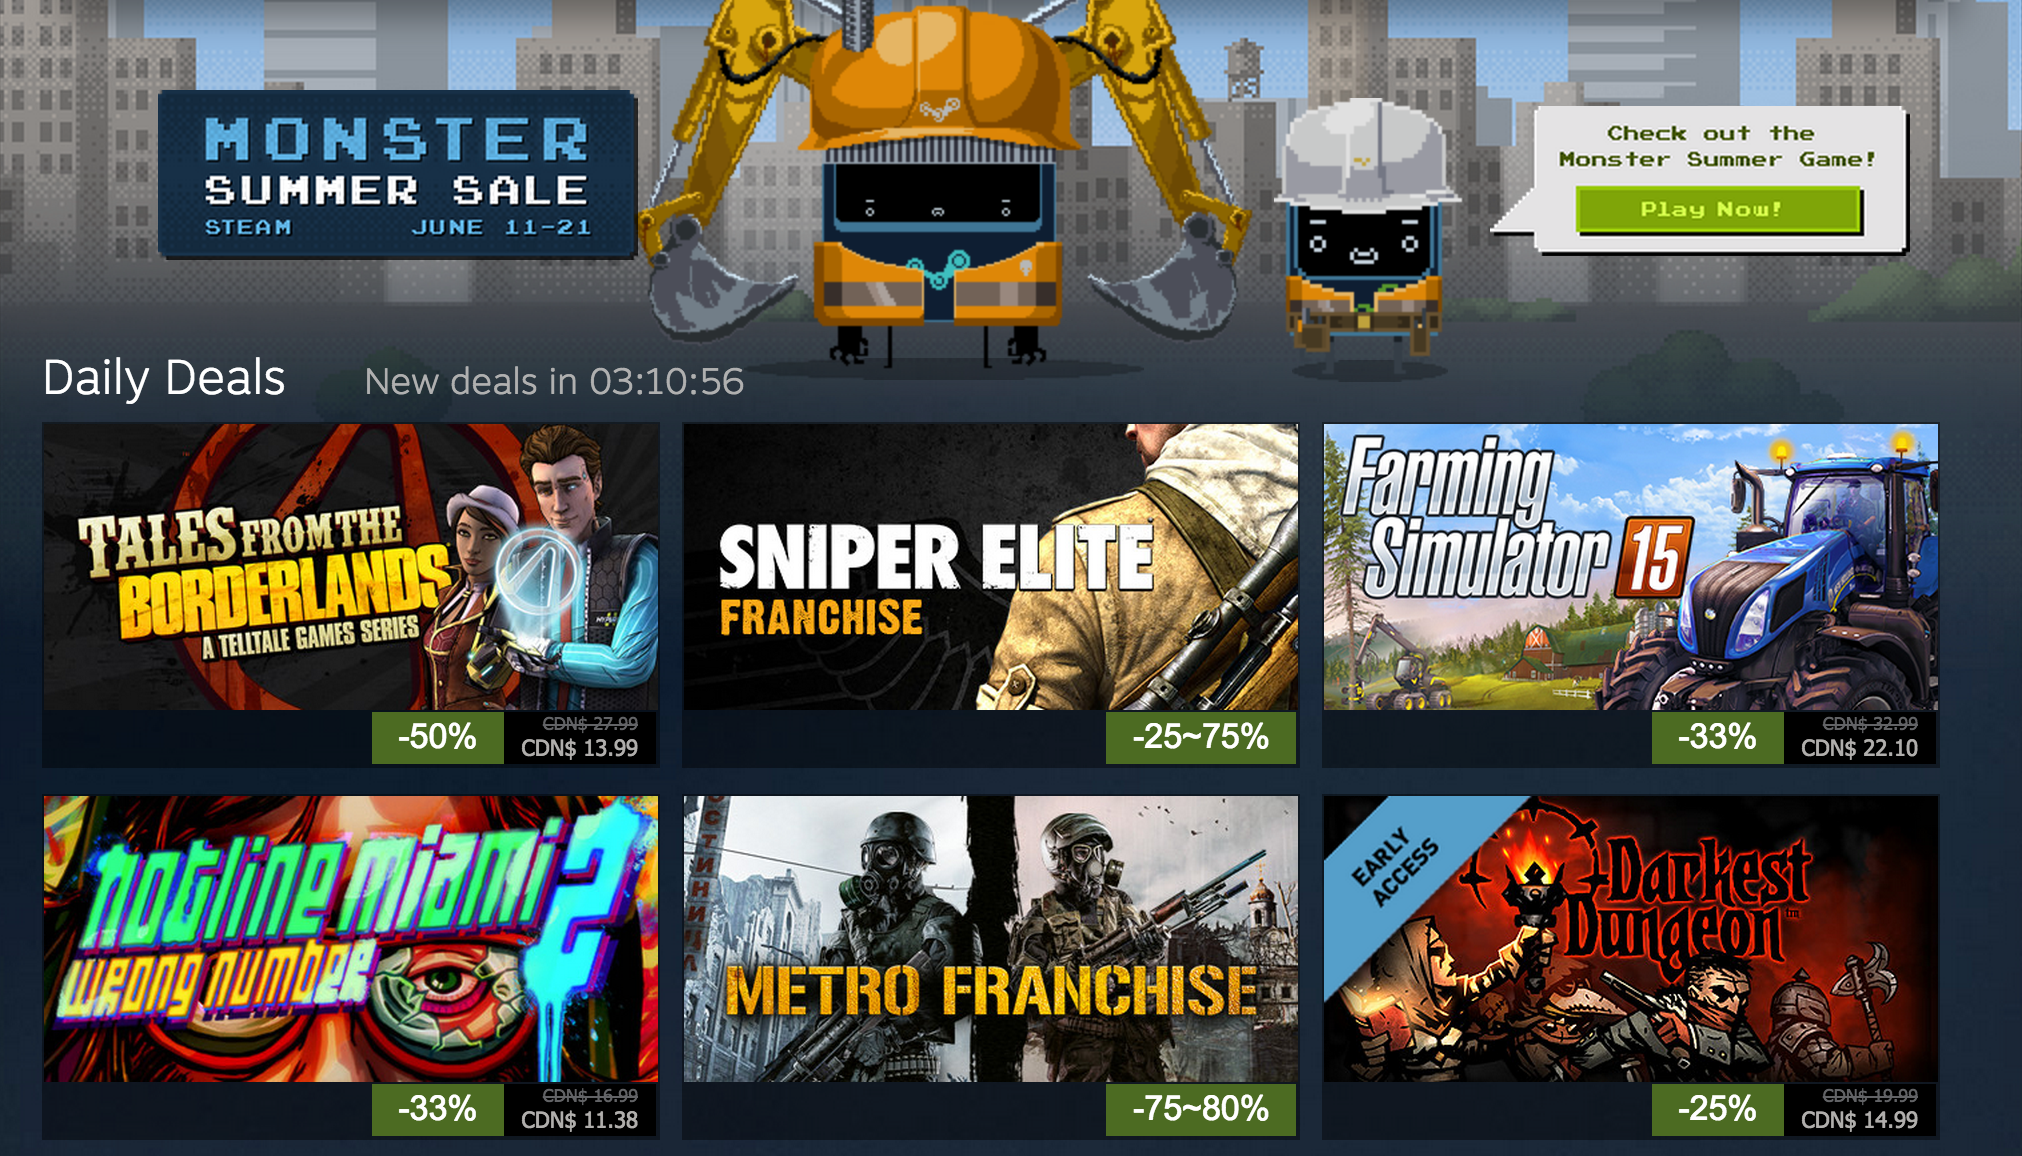 Games/Apps: Steam Summer Sale up to 75% off GTA, Hotline Miami 2 $10,  Xenoblade 3D $36, freebies, more